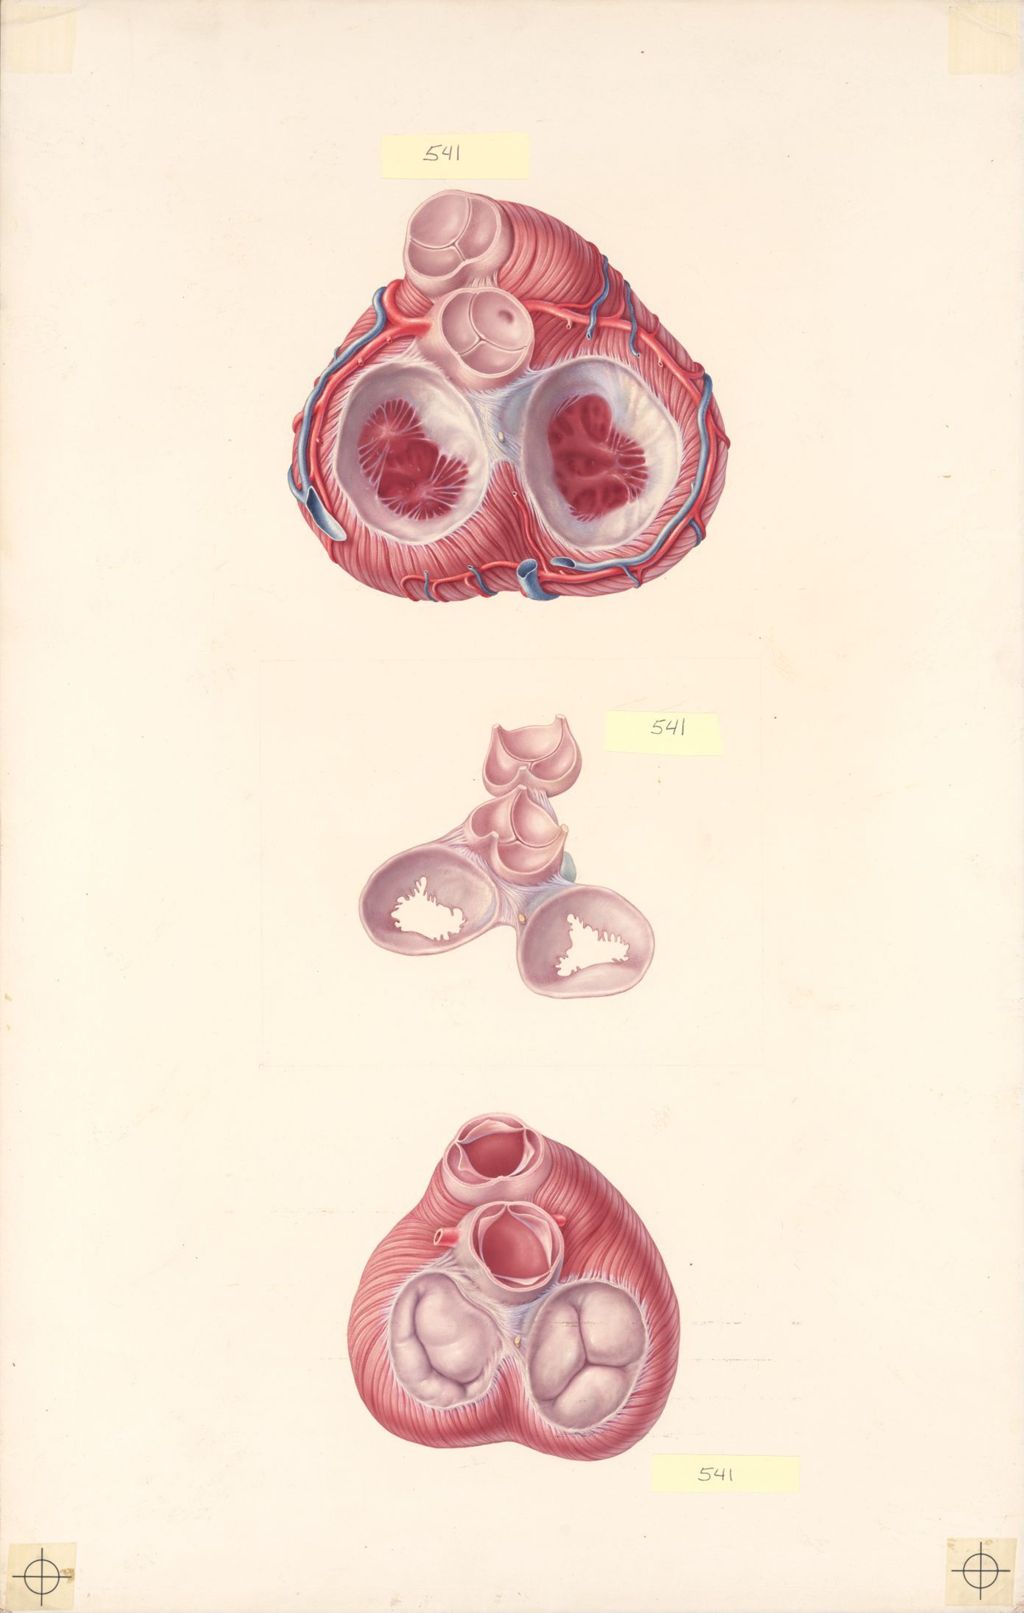 Miniature of Explanatory Atlas of Anatomy, Anatomy of the Valves of the Heart, Plate II, The Heart Skeleton and its Relationship to the Valves